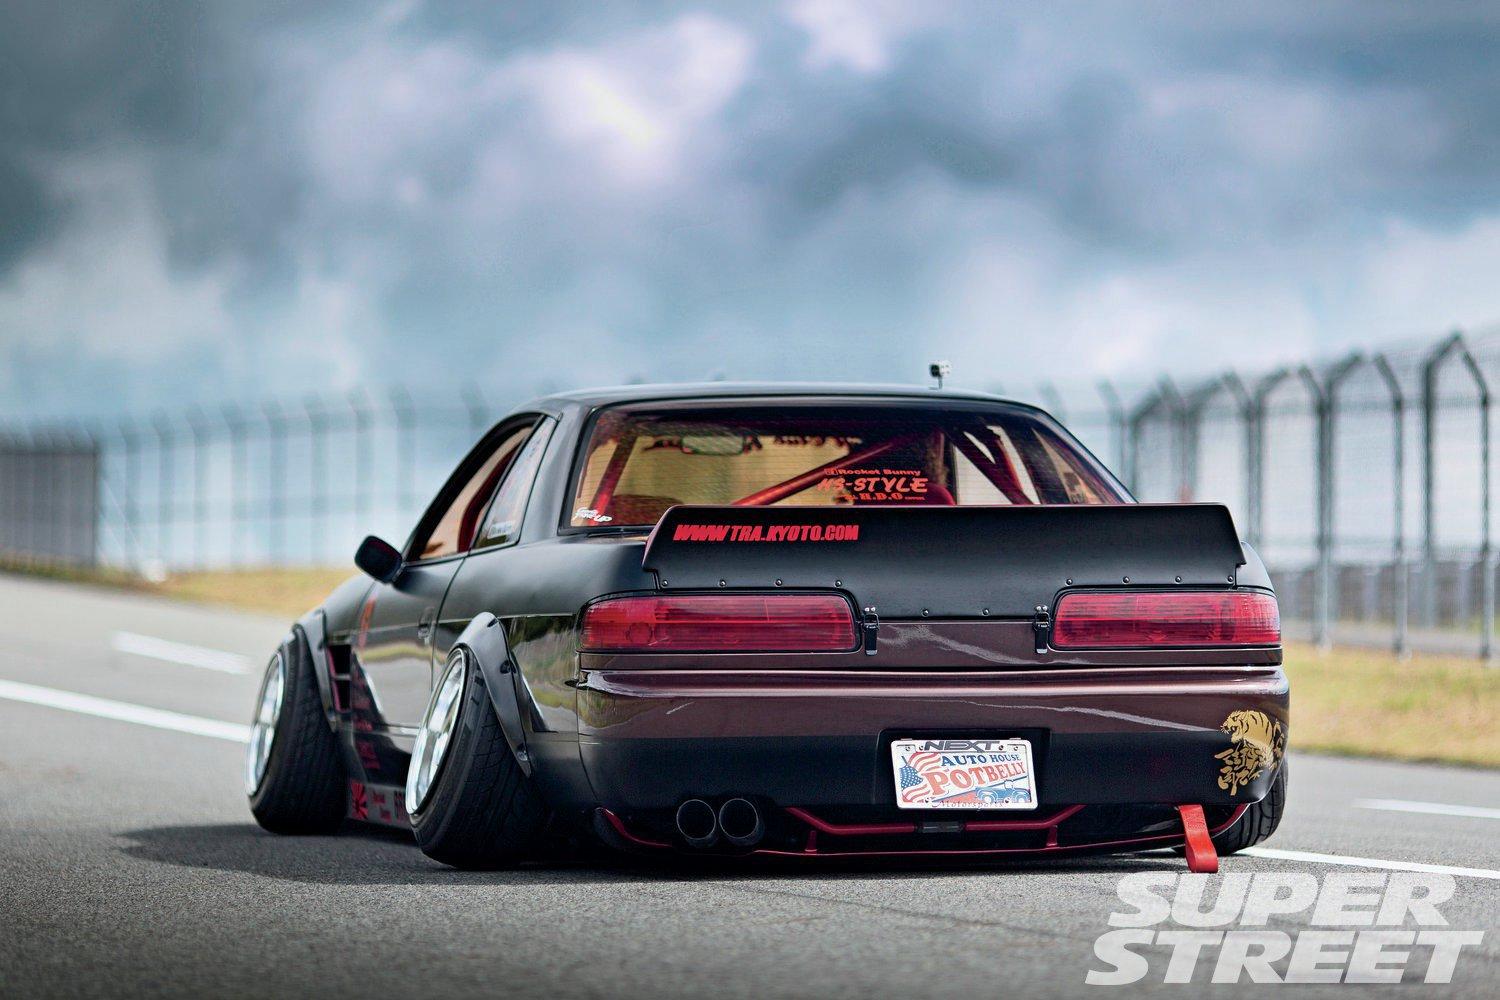 Free download super slammed cars Car Picture 1500x1000